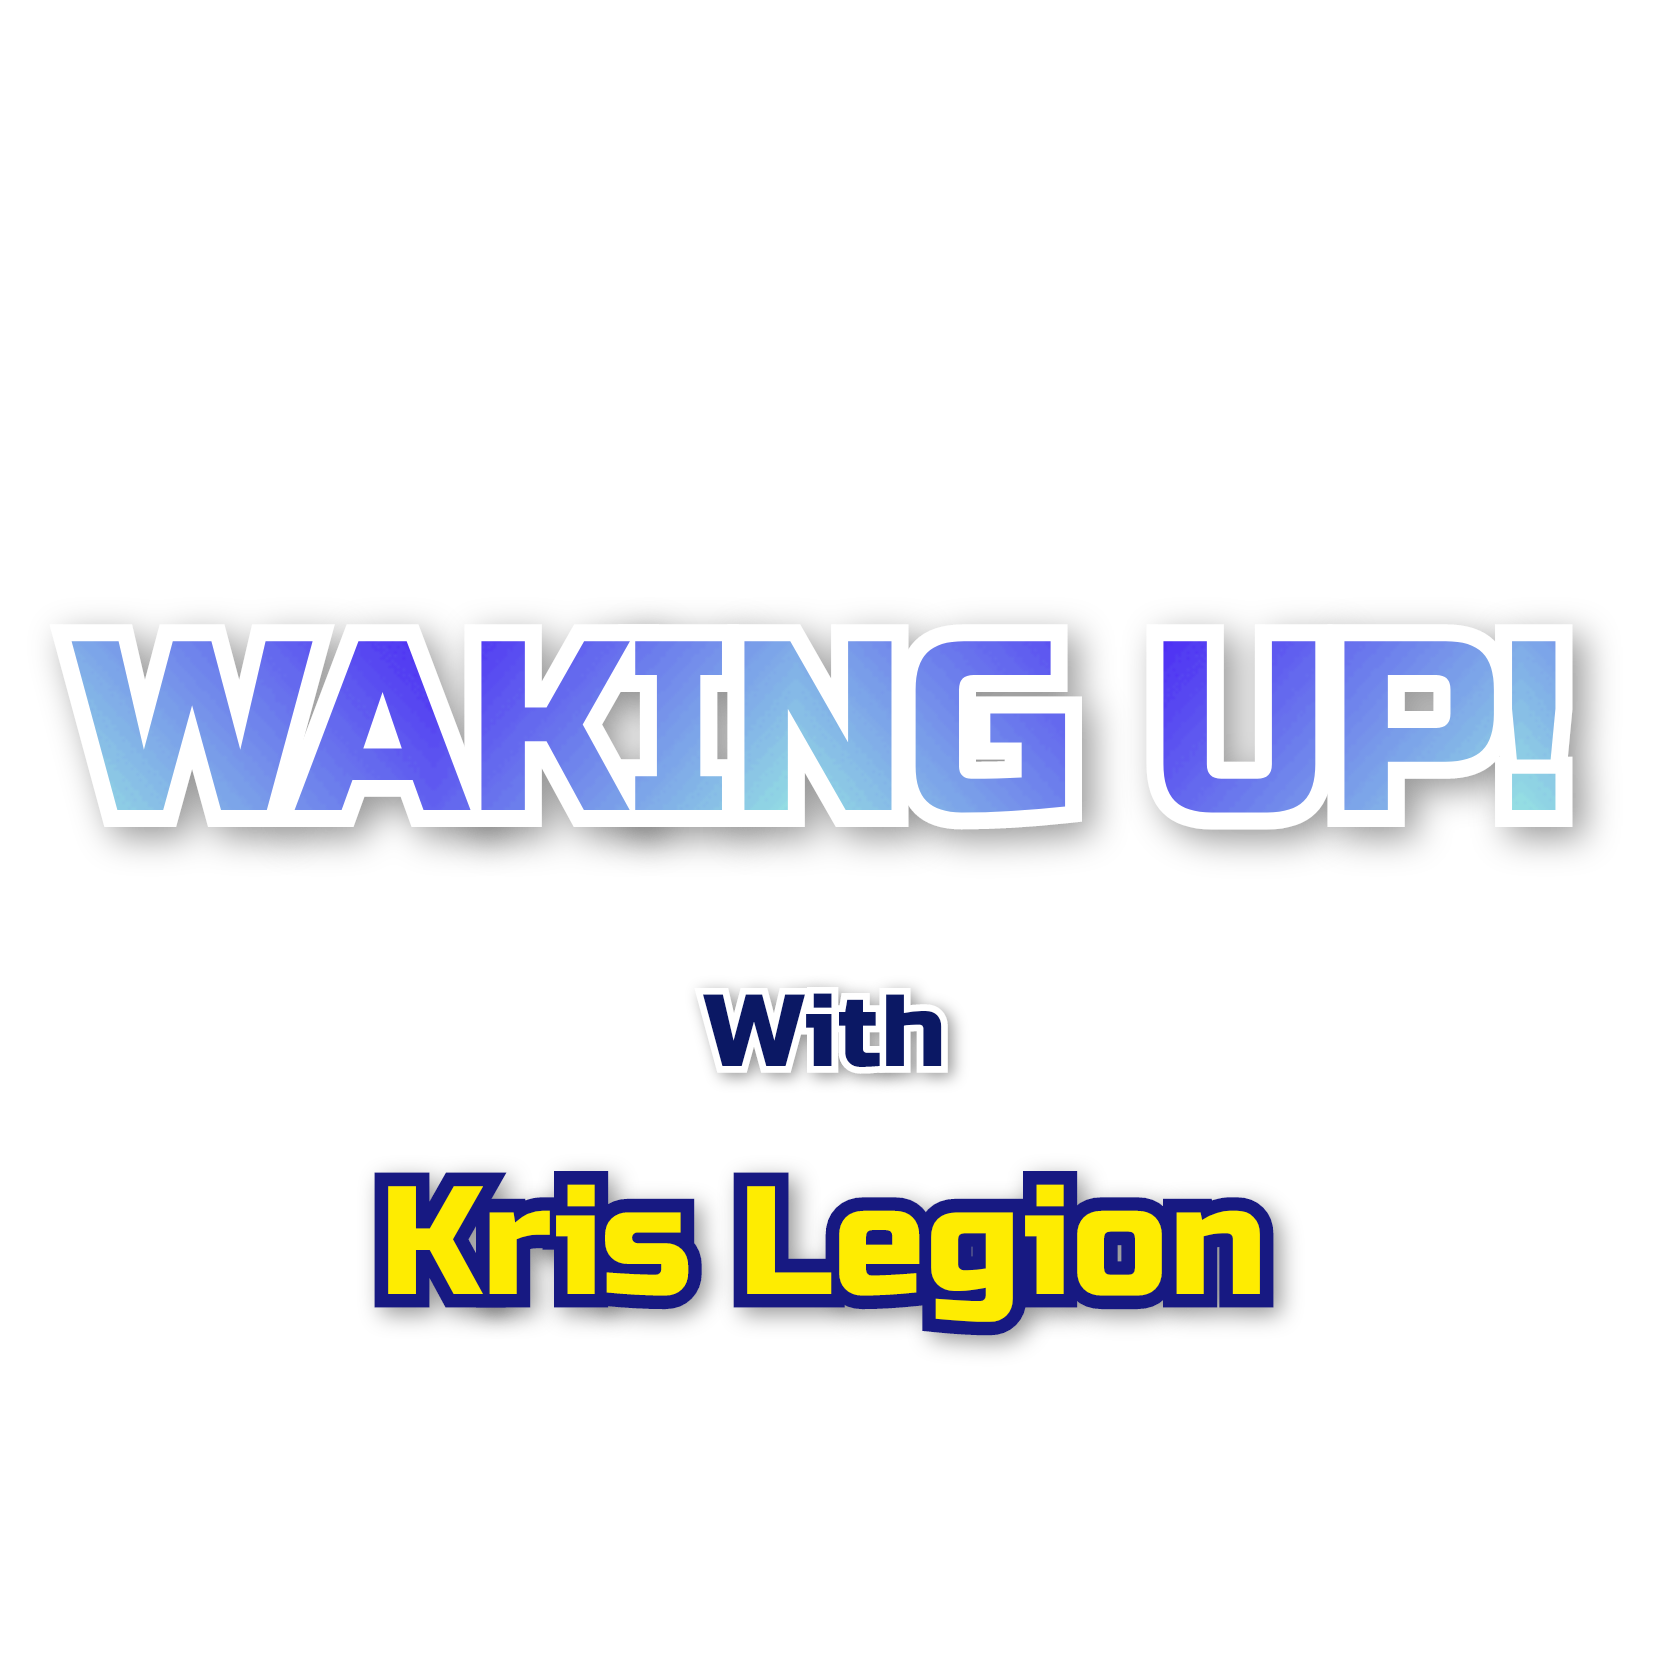 Artwork for Waking Up! with Kris Legion